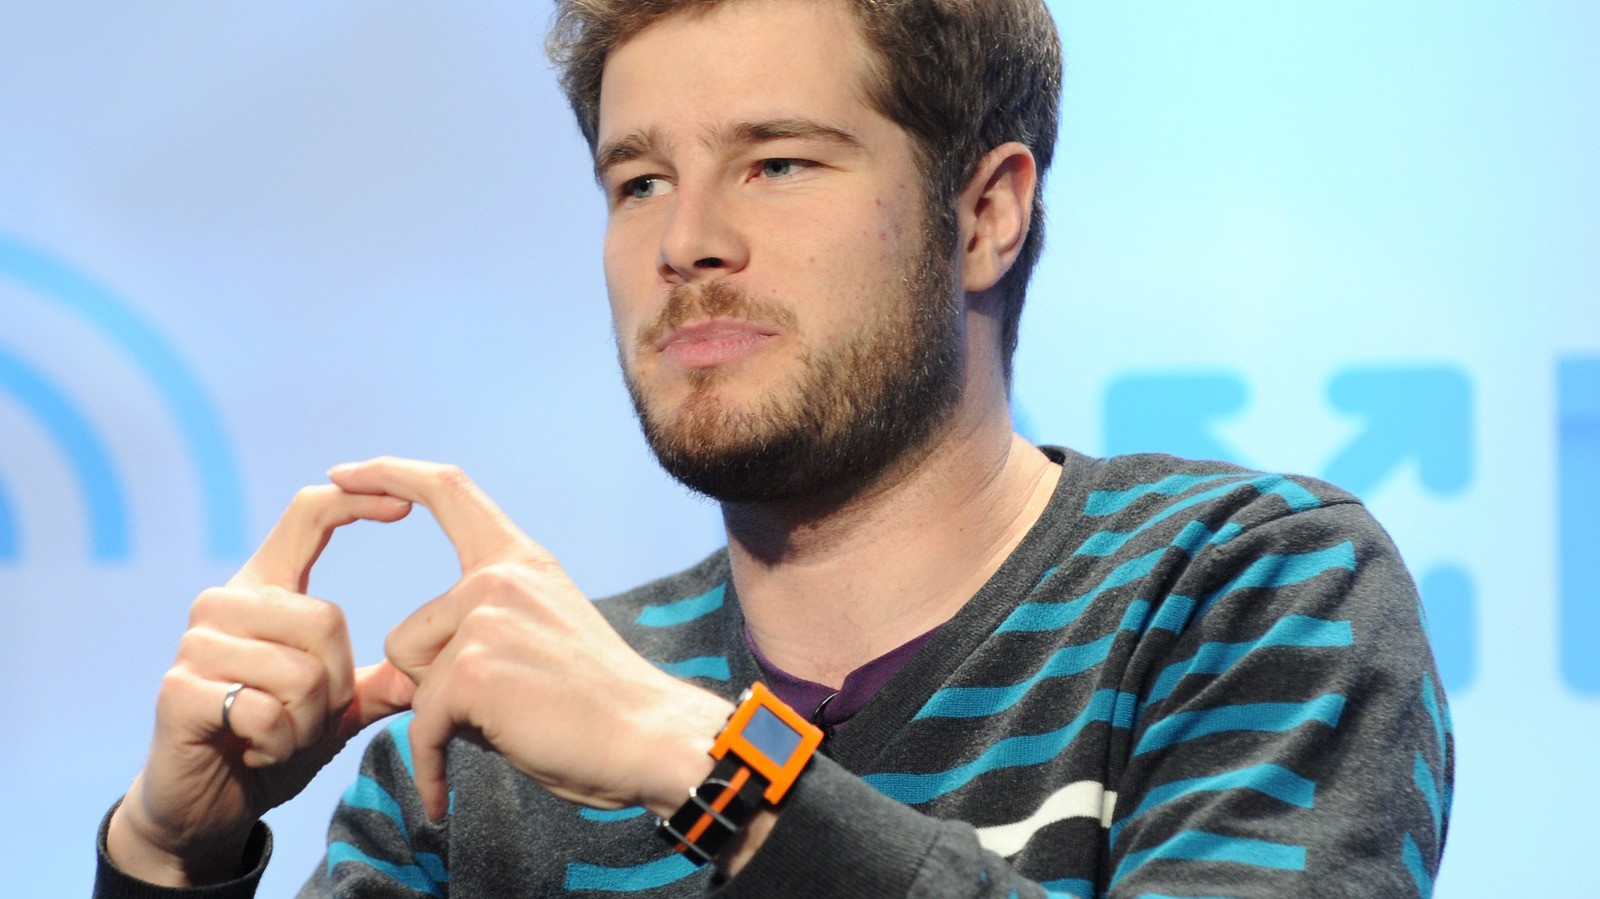 The Founder Of Pebble Wants To Create A New Practical And Compact Android Phone – SlashGear